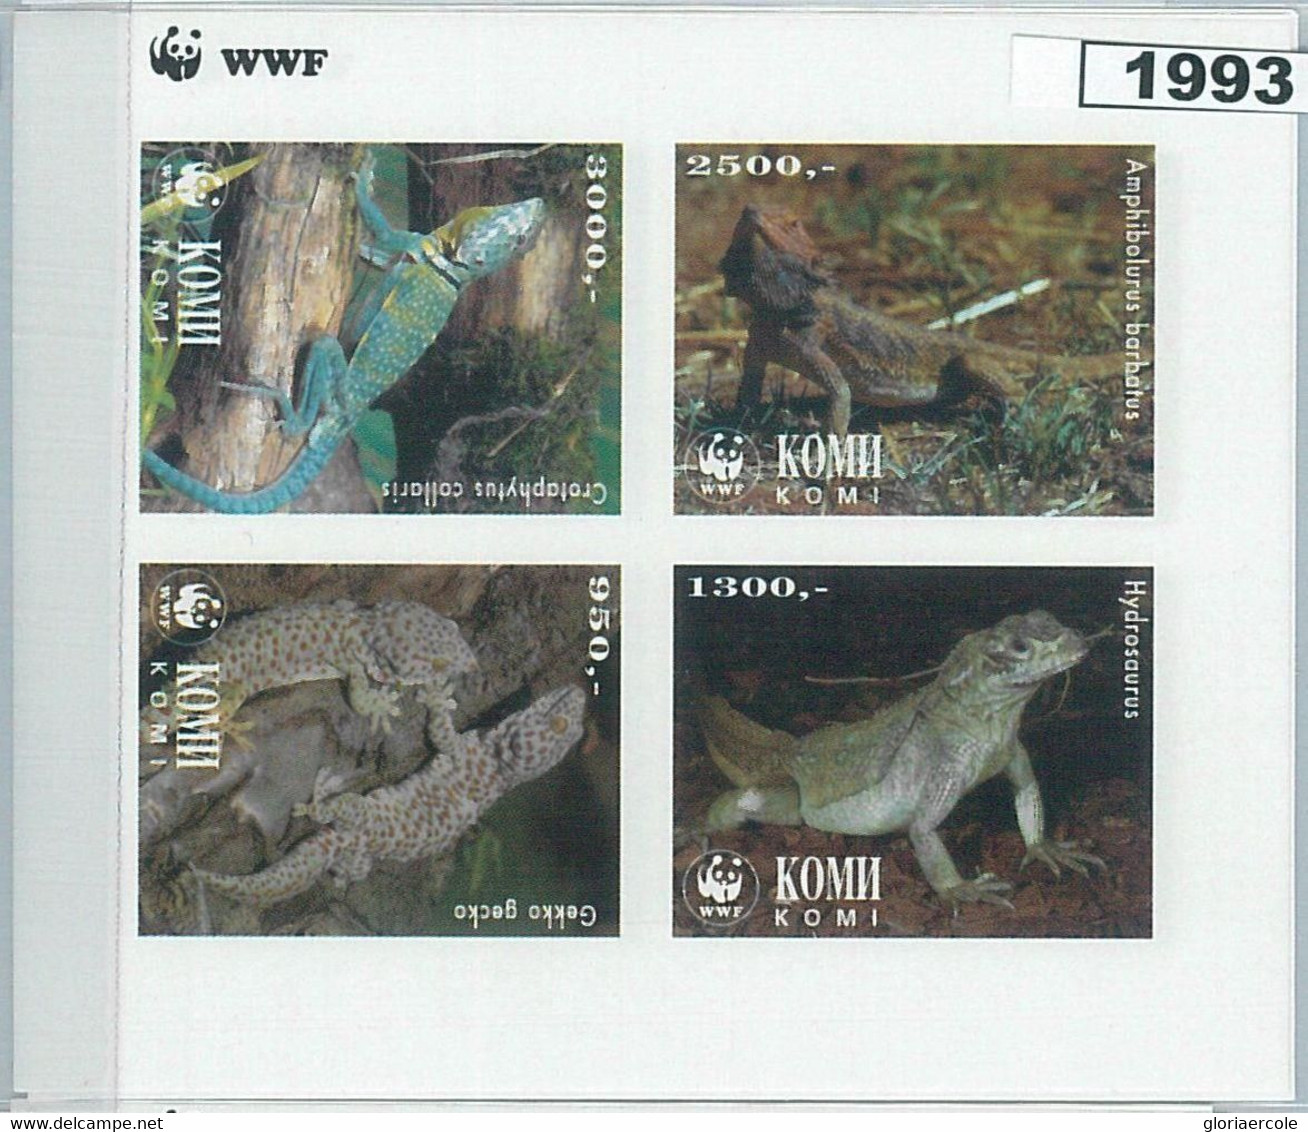 M1993 - RUSSIAN STATE, IMPERF SHEET: WWF, Lizards, Reptiles  R04.22 - Used Stamps